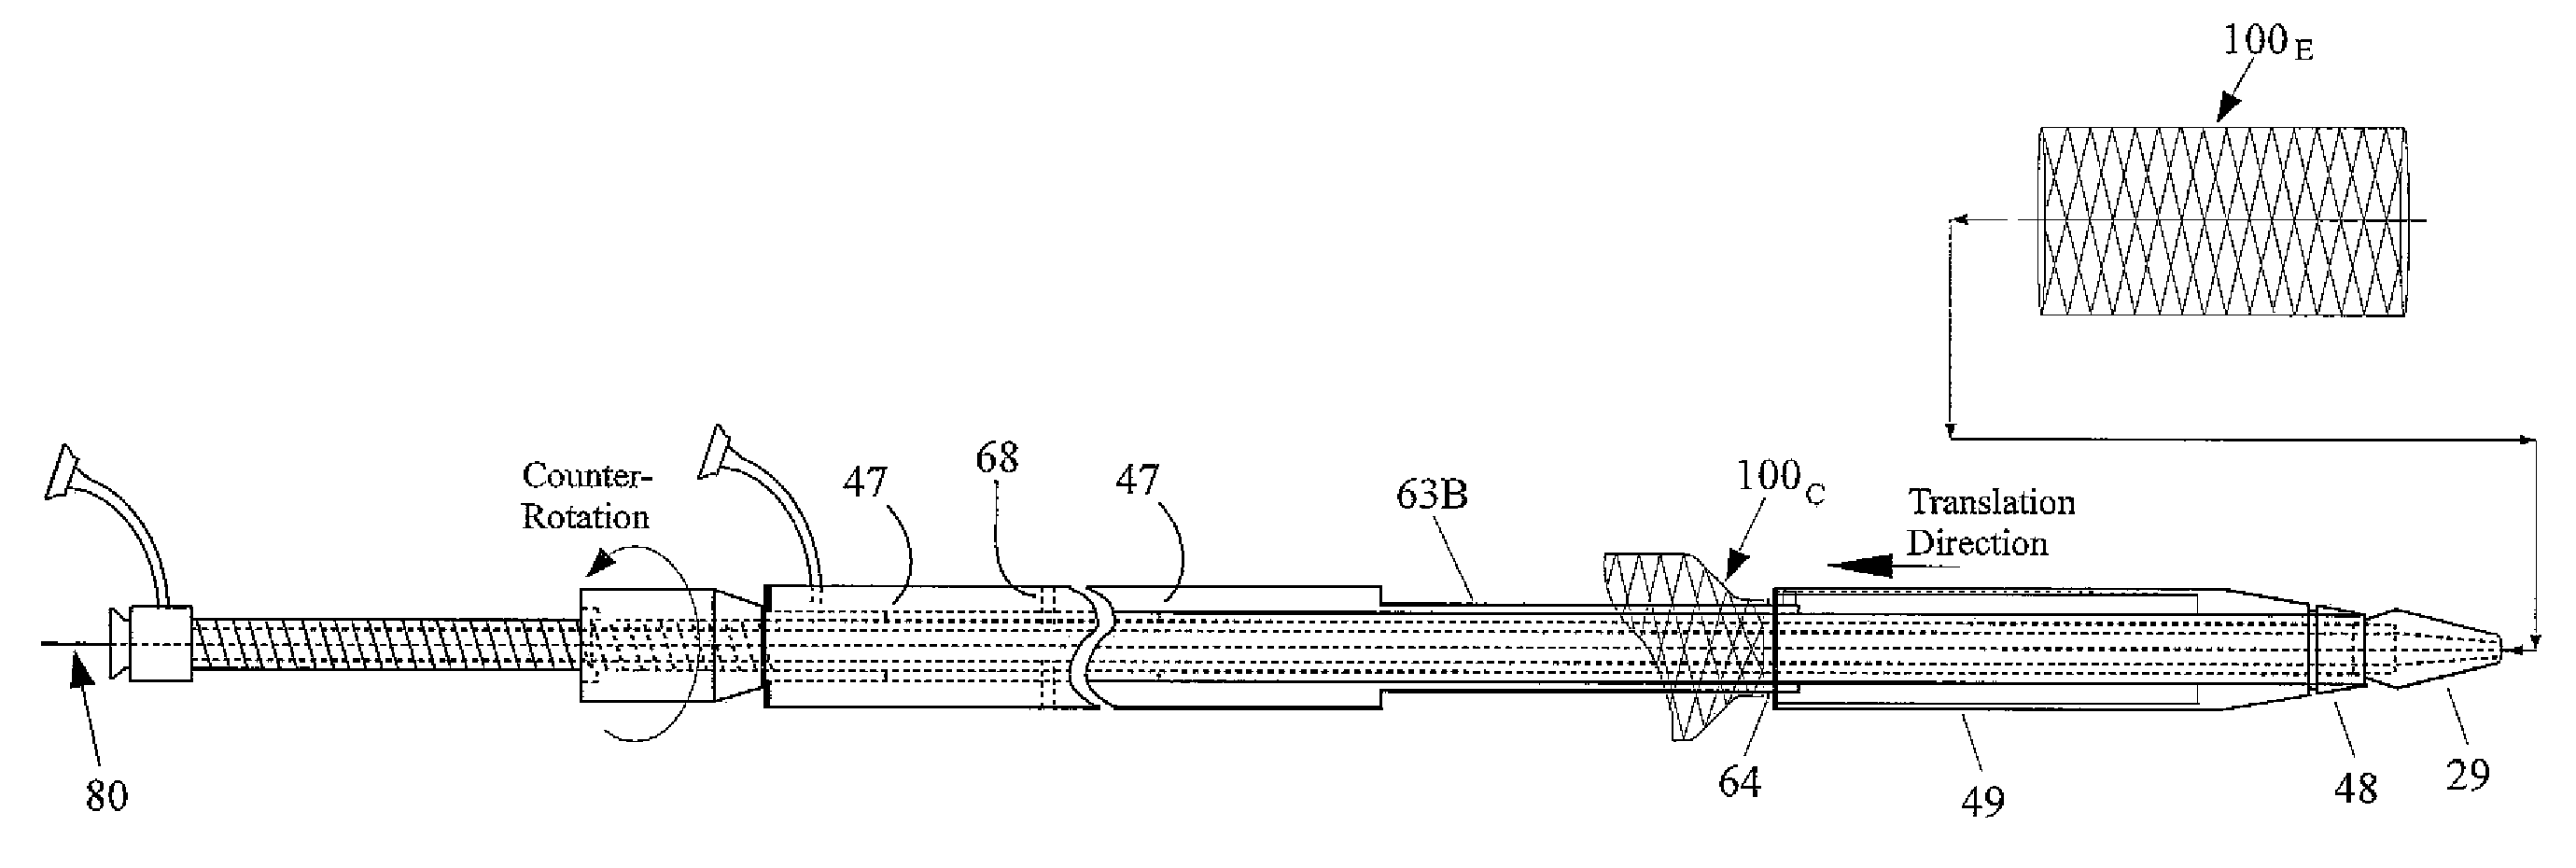 Apparatus And Method for Proximal-to-Distal Endoluminal Stent Deployment